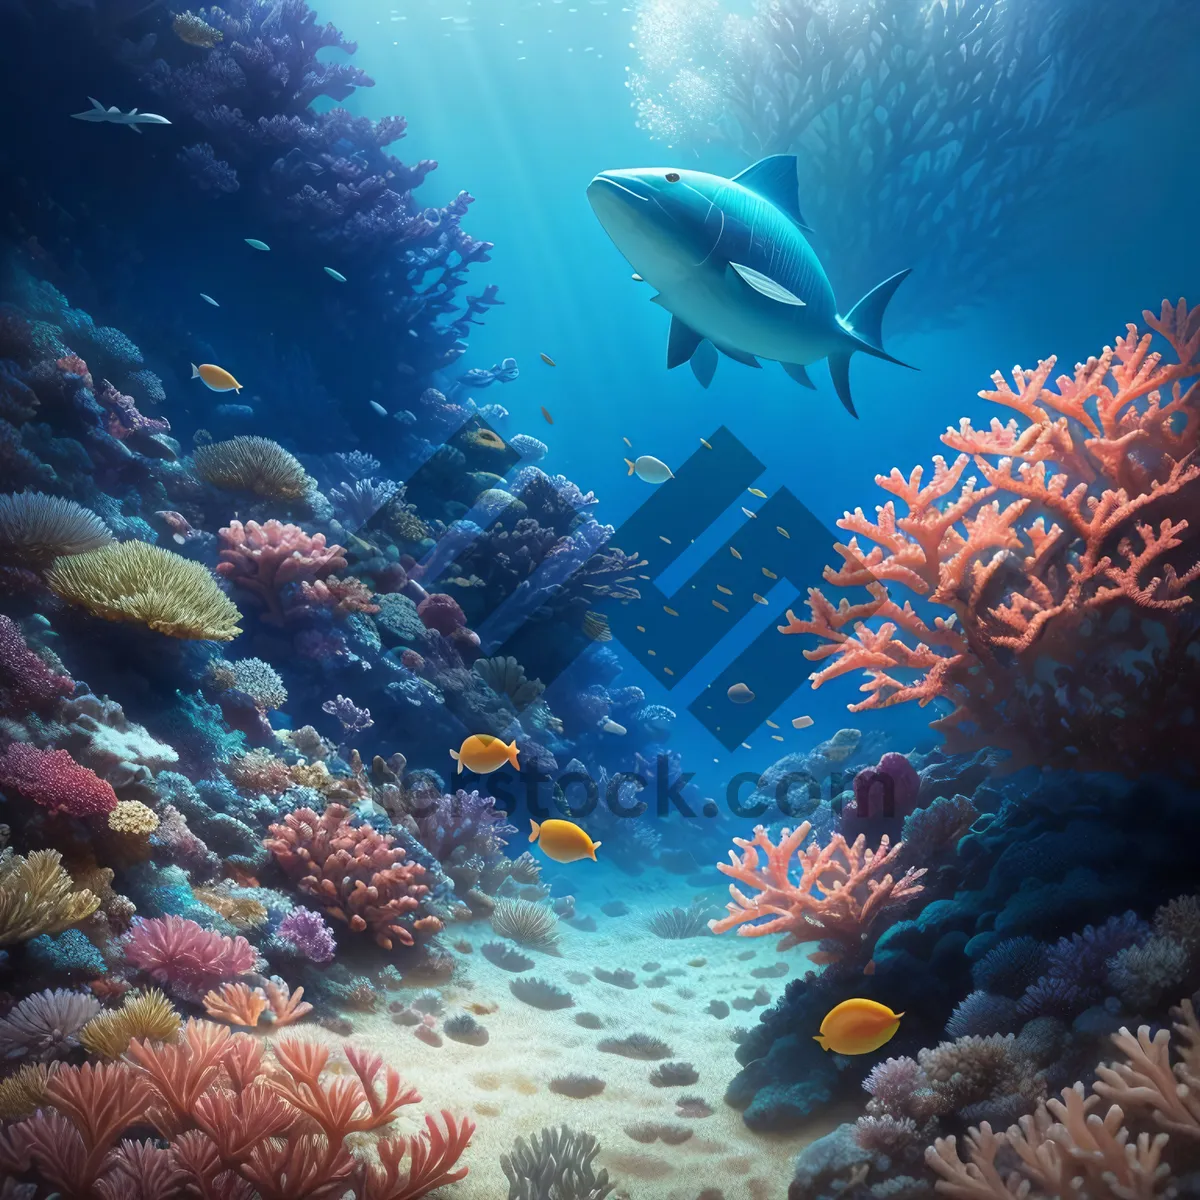 Picture of Exotic Coral Reef Exploration: Colorful Marine Life amidst Sunlit Waters.